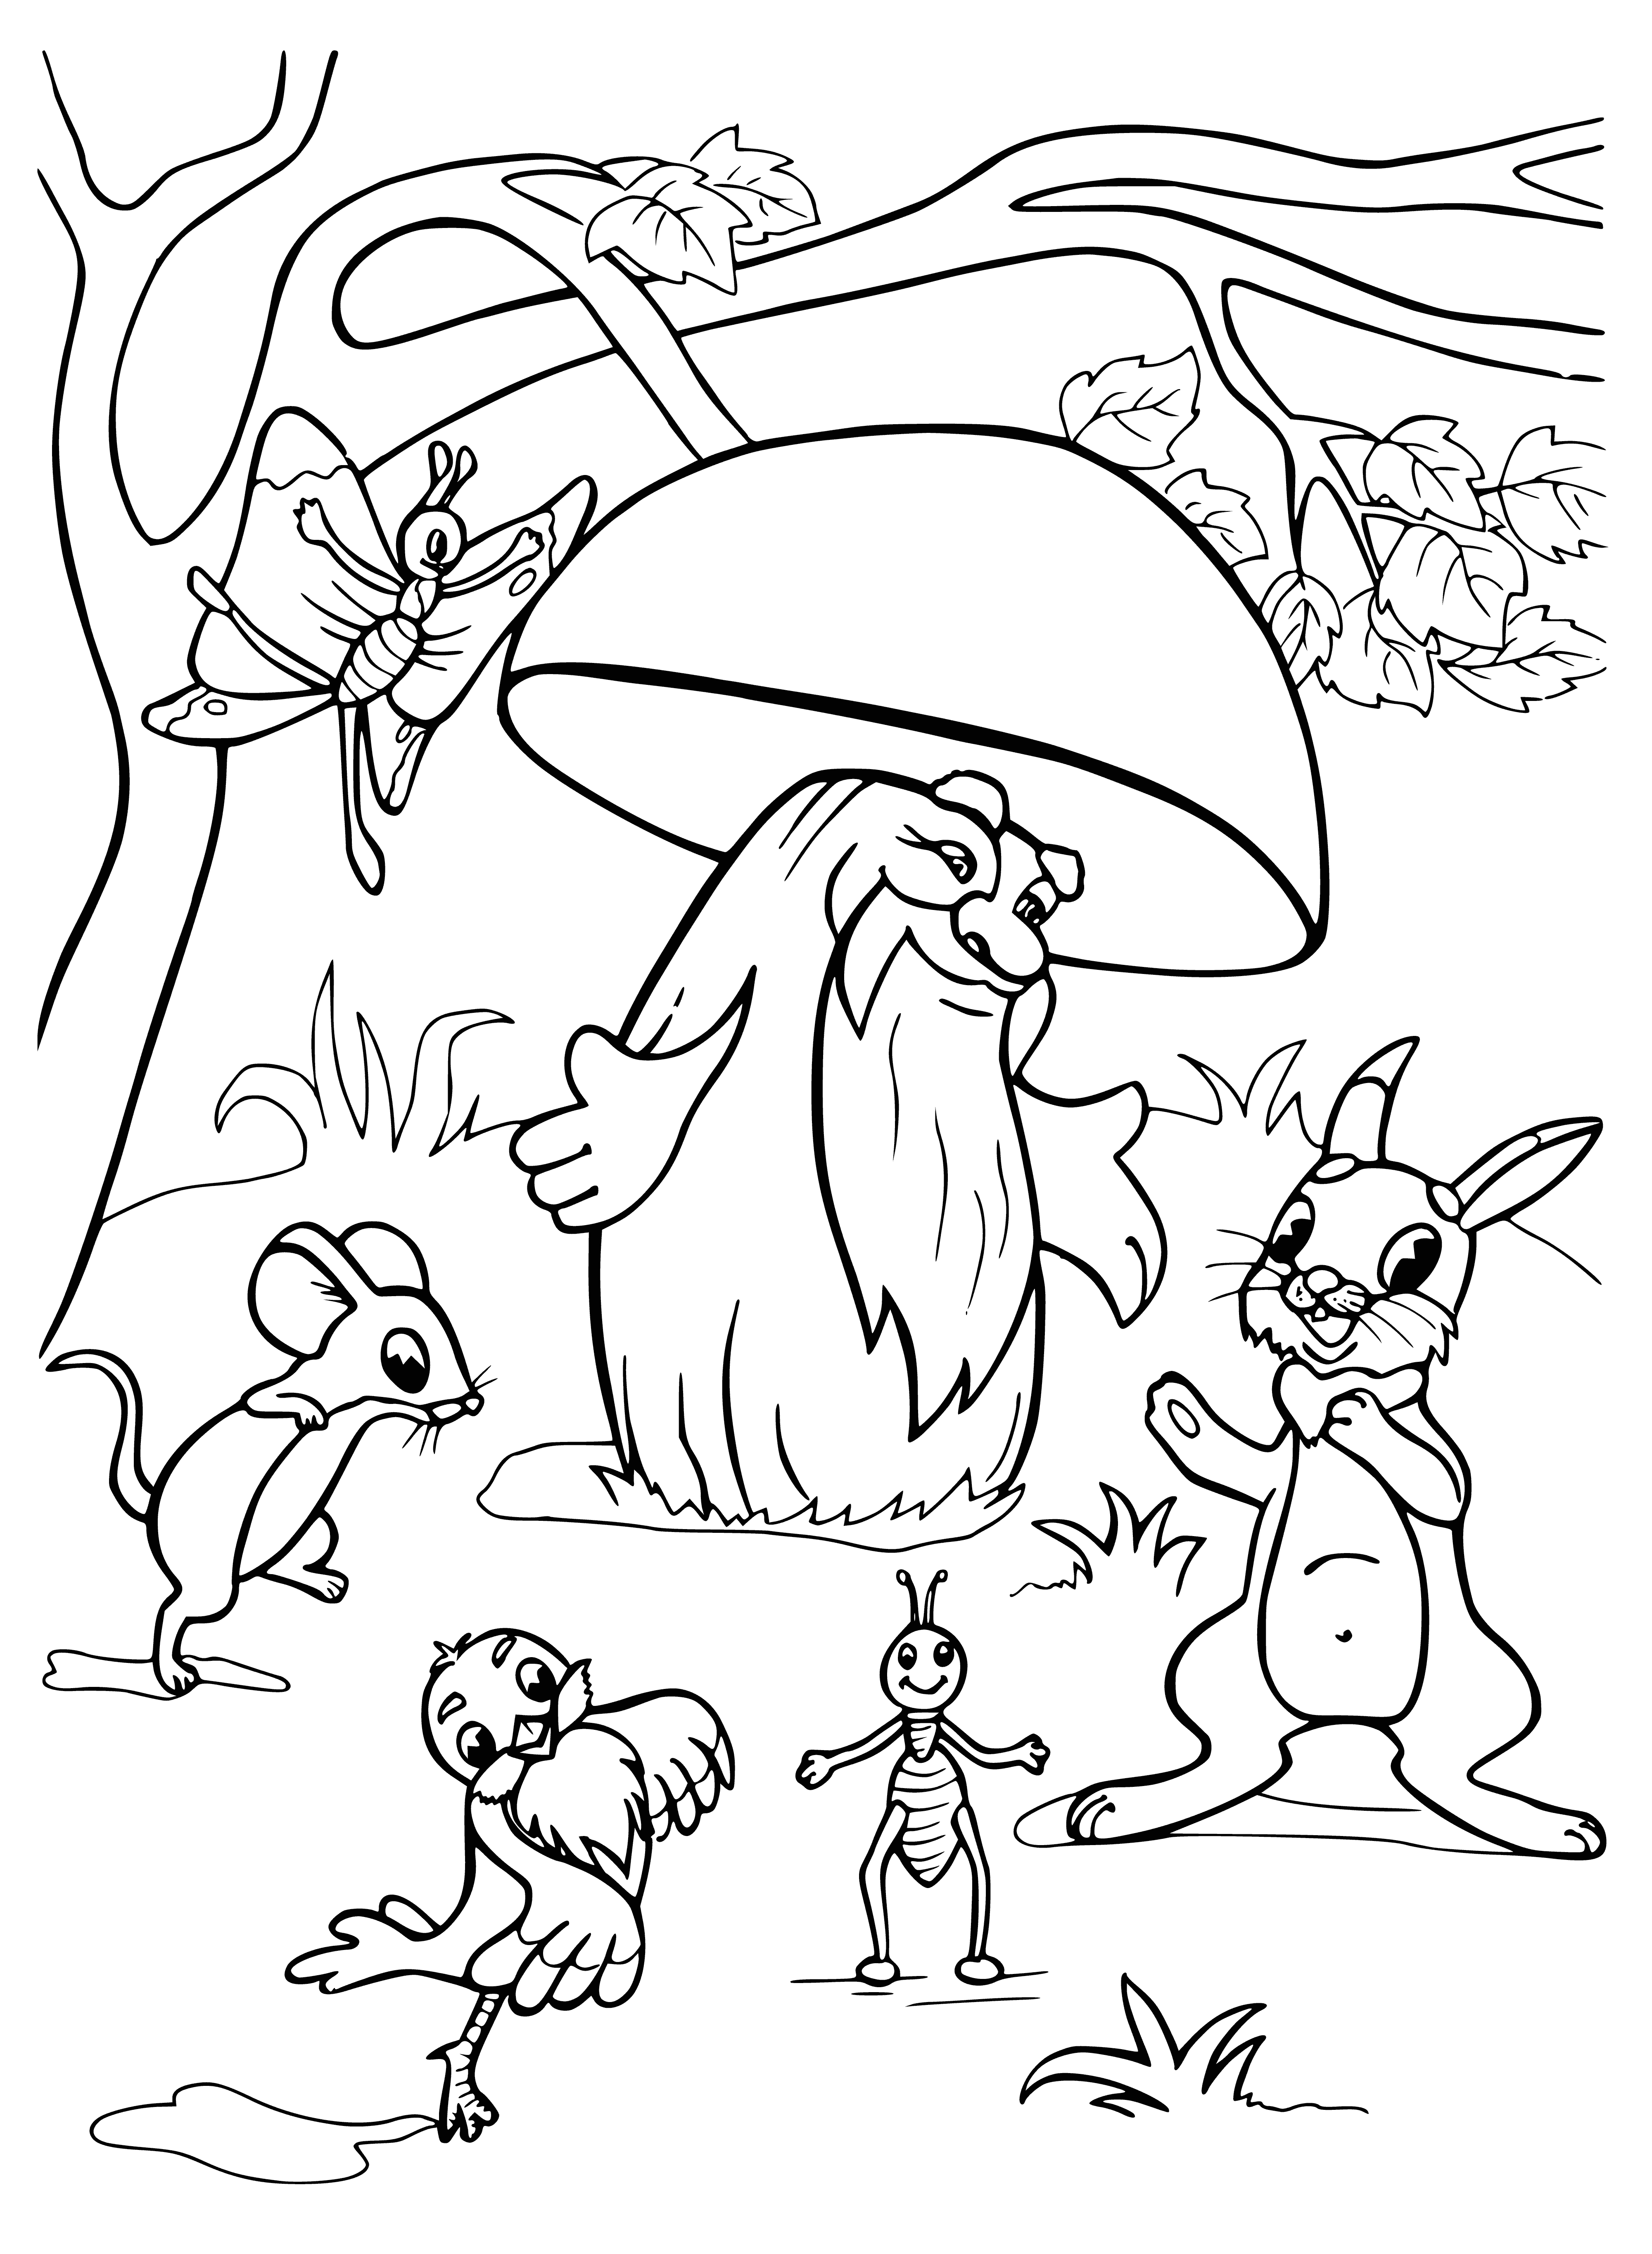 coloring page: Children playing, laughing, dancing & having fun under a big mushroom - a scene of happiness & joy!